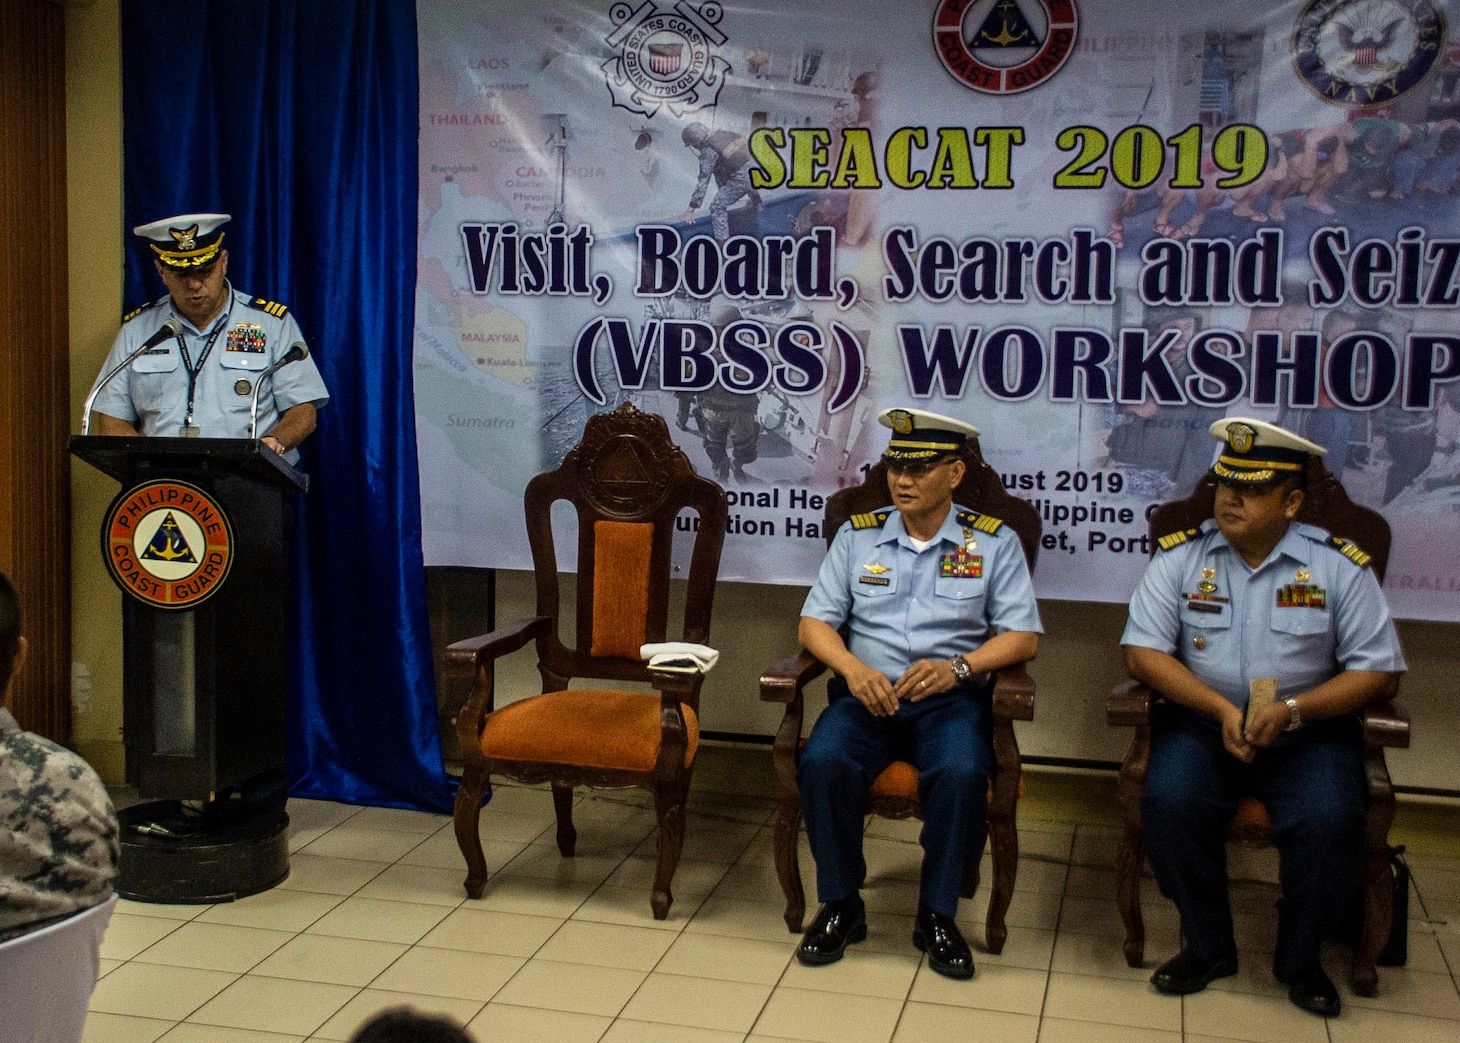 MANILA, Philippines (Aug. 19, 2019). U.S. Coast Guard Cmdr. David Negron-Alicea, Defense Threat Reduction Agency maritime advisor for U.S. Embassy Manila, delivers keynote remarks during the visit, board, search and seizure workshop as part of Southeast Asia Cooperation and Training (SEACAT) 2019 at the Philippine Coast Guard Headquarters in Manila. This year marks the 18th iteration of SEACAT, which is designed to enhance maritime security skills by highlighting the value of information sharing and multilateral coordination.